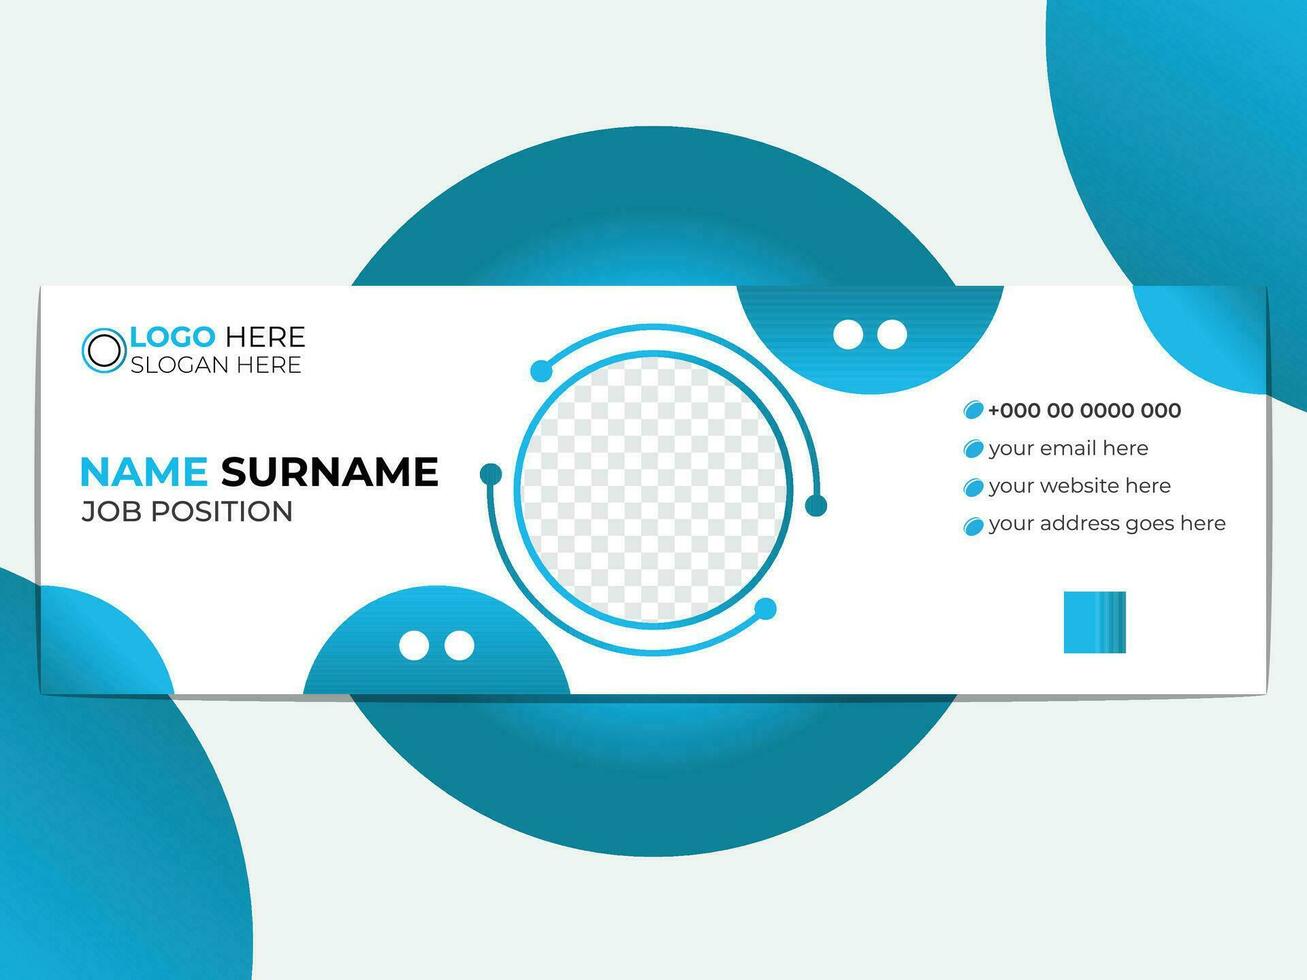 Modern corporate email signature card design template with round shapes for all types of business identity growth or promotion vector